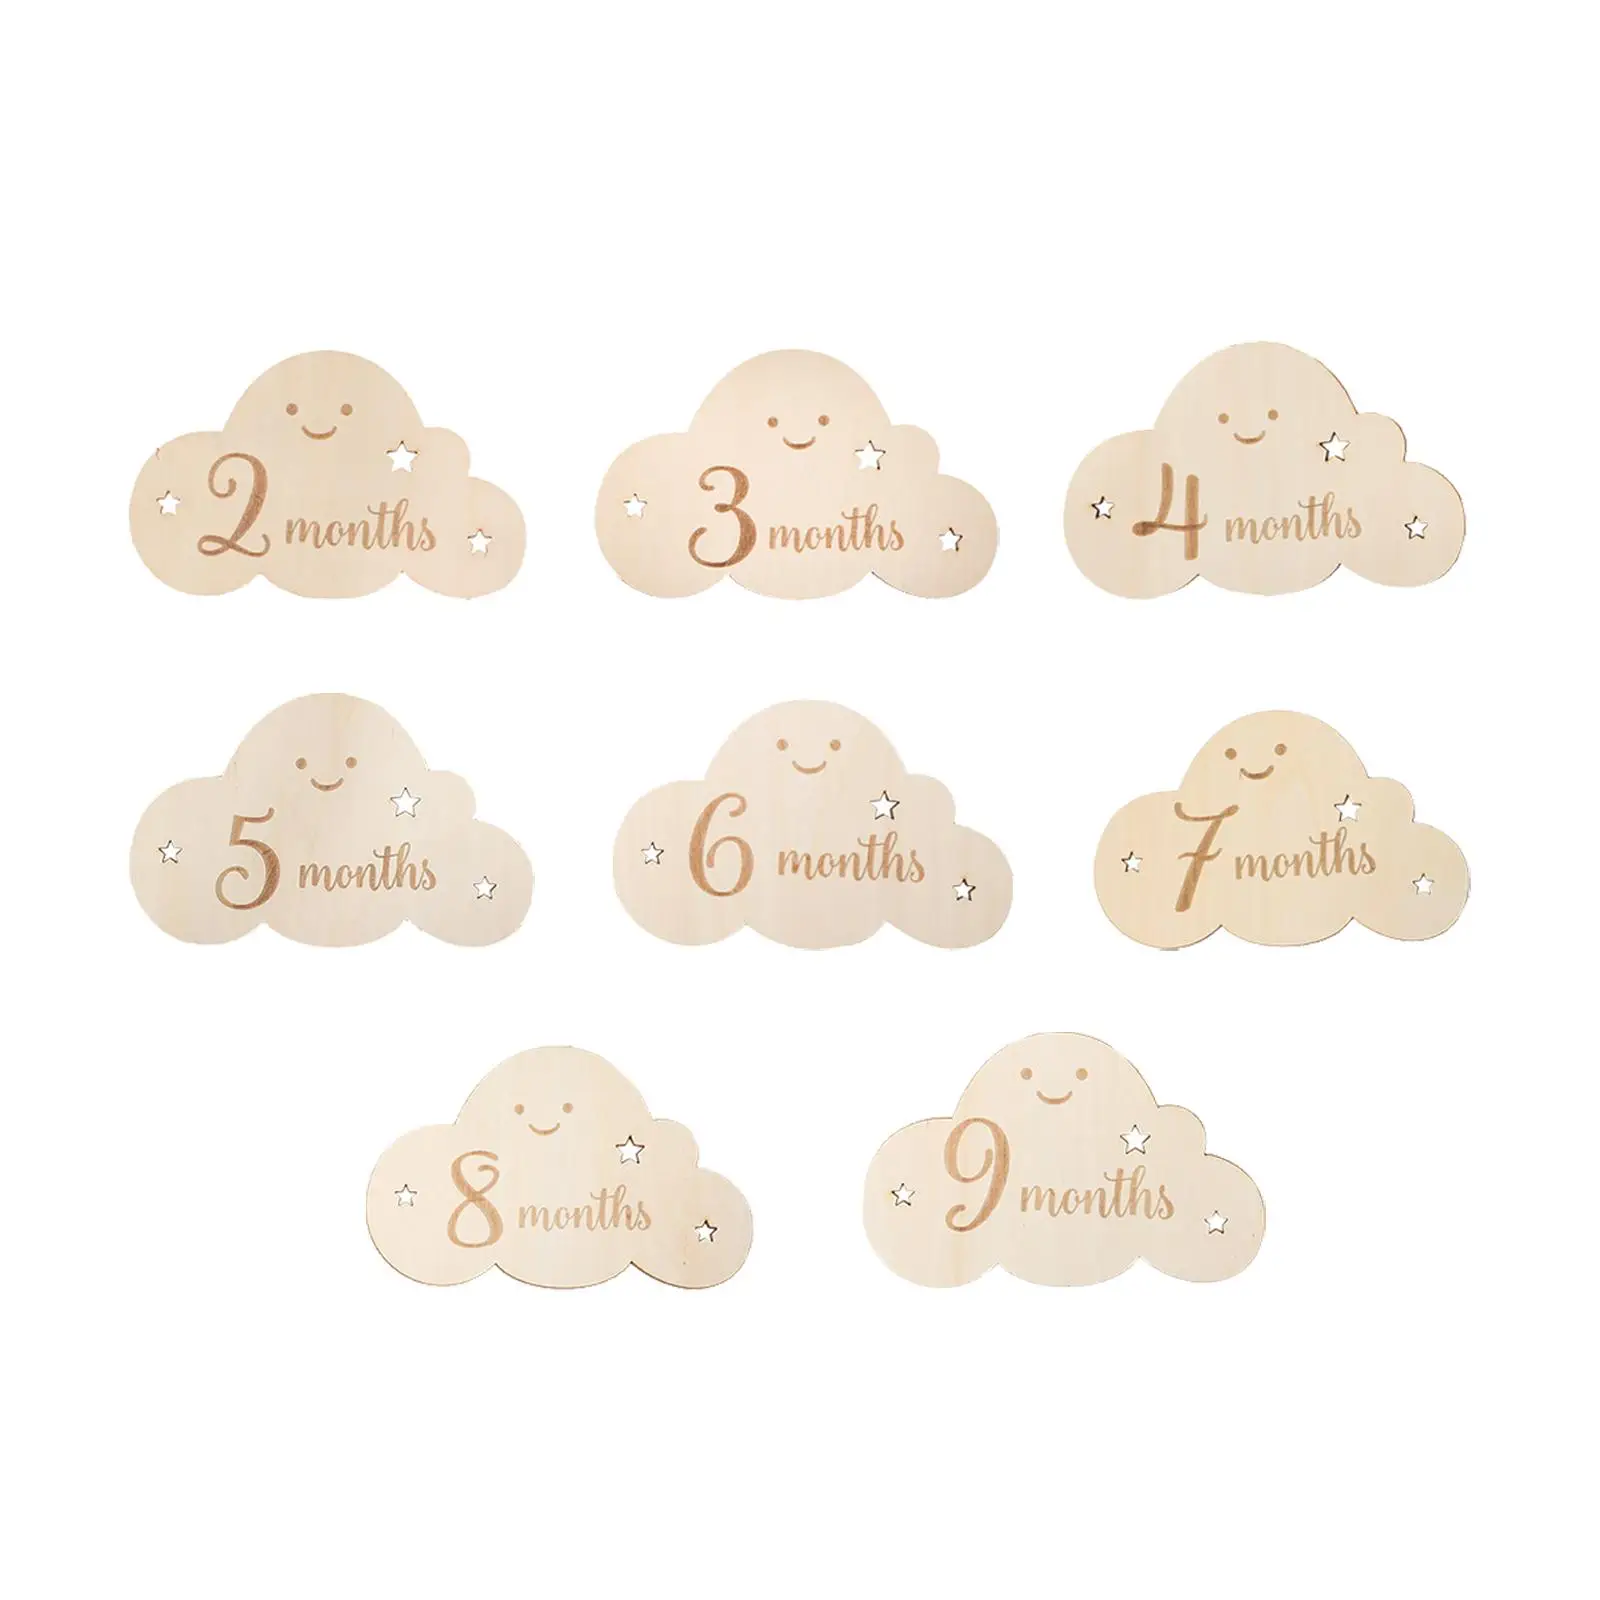 

8x Wooden Baby Milestone Cards Keepsake Toy Cute Clouds Shape Smooth Surface Photography Accessories New Mom Gifts Newborn Gifts